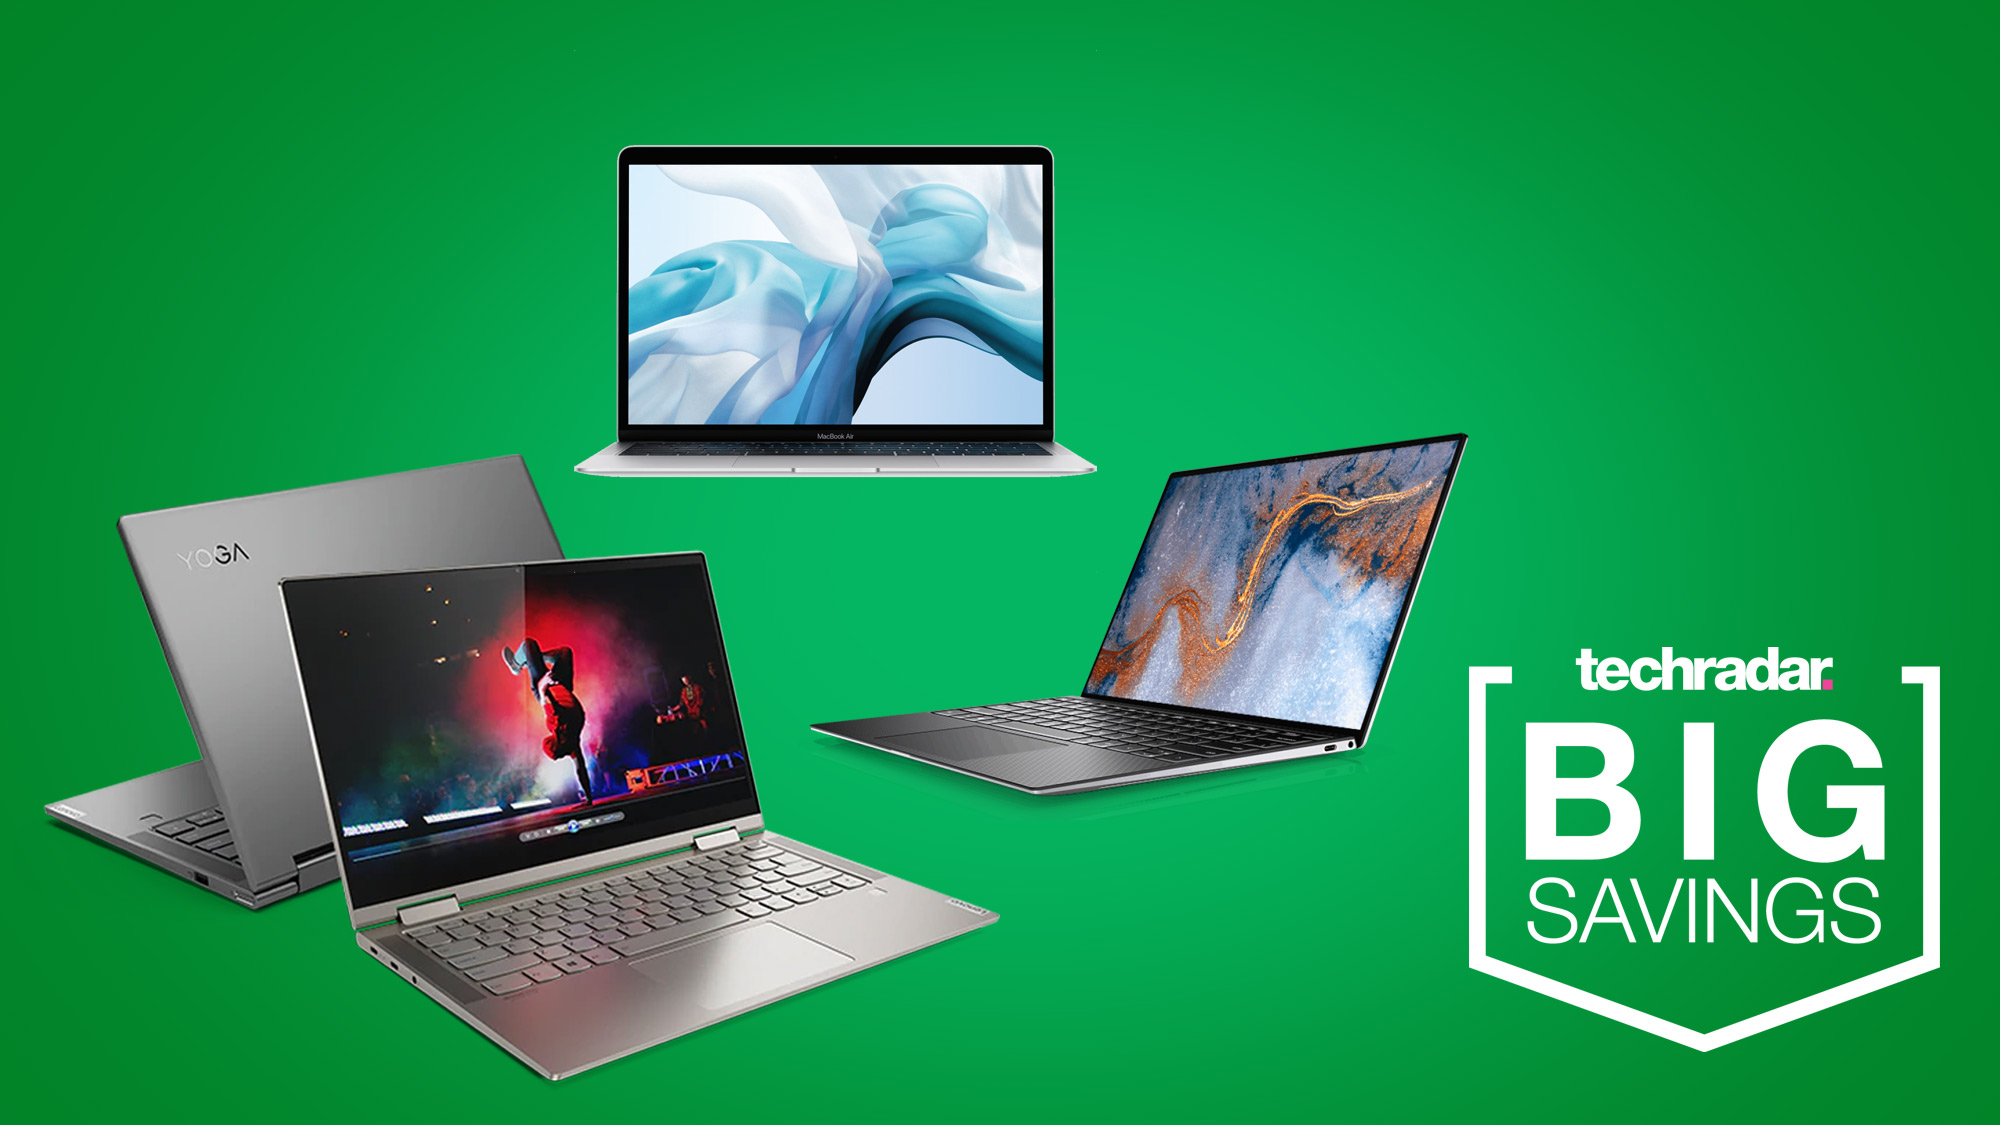 4th of July sales laptop deals from Dell, Lenovo, HP and more